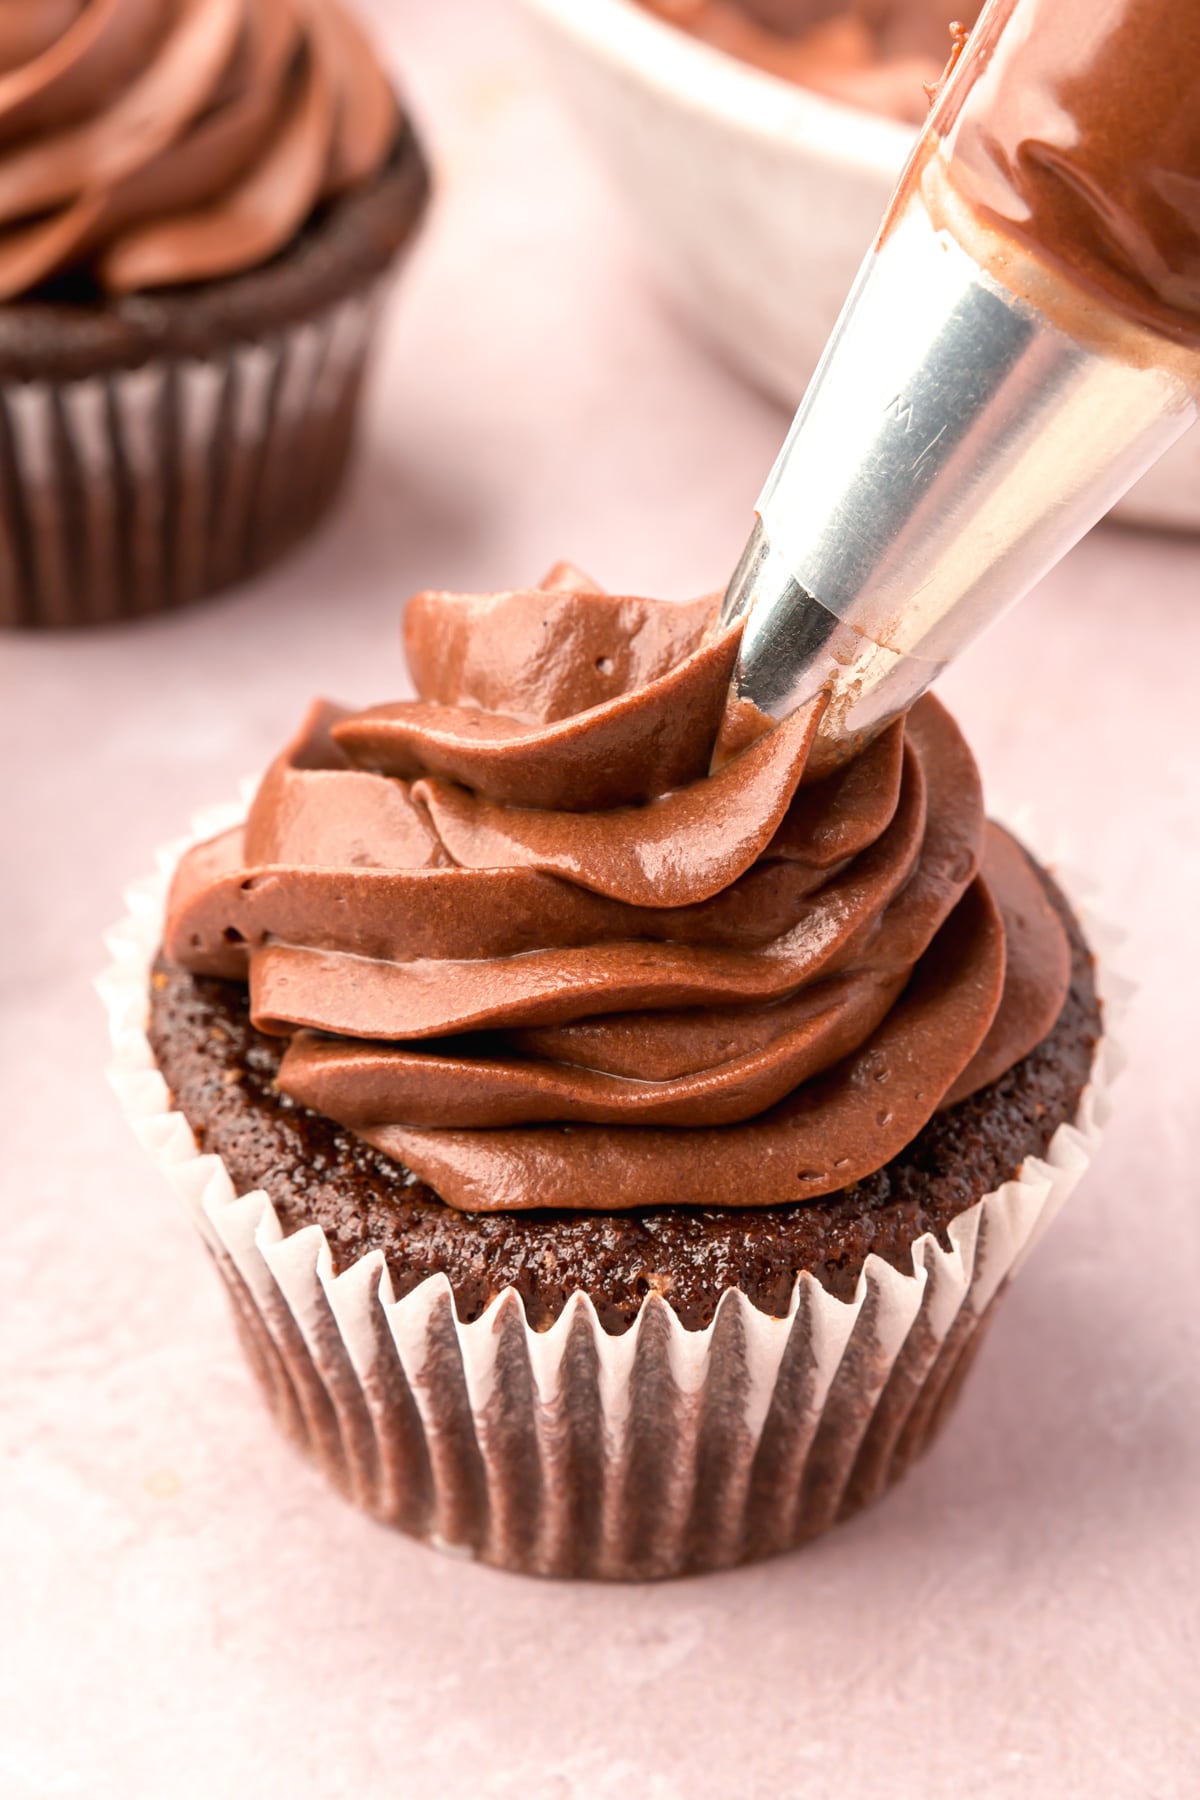 Chocolate cream cheese frosting being piped onto a chocolate cupcake.